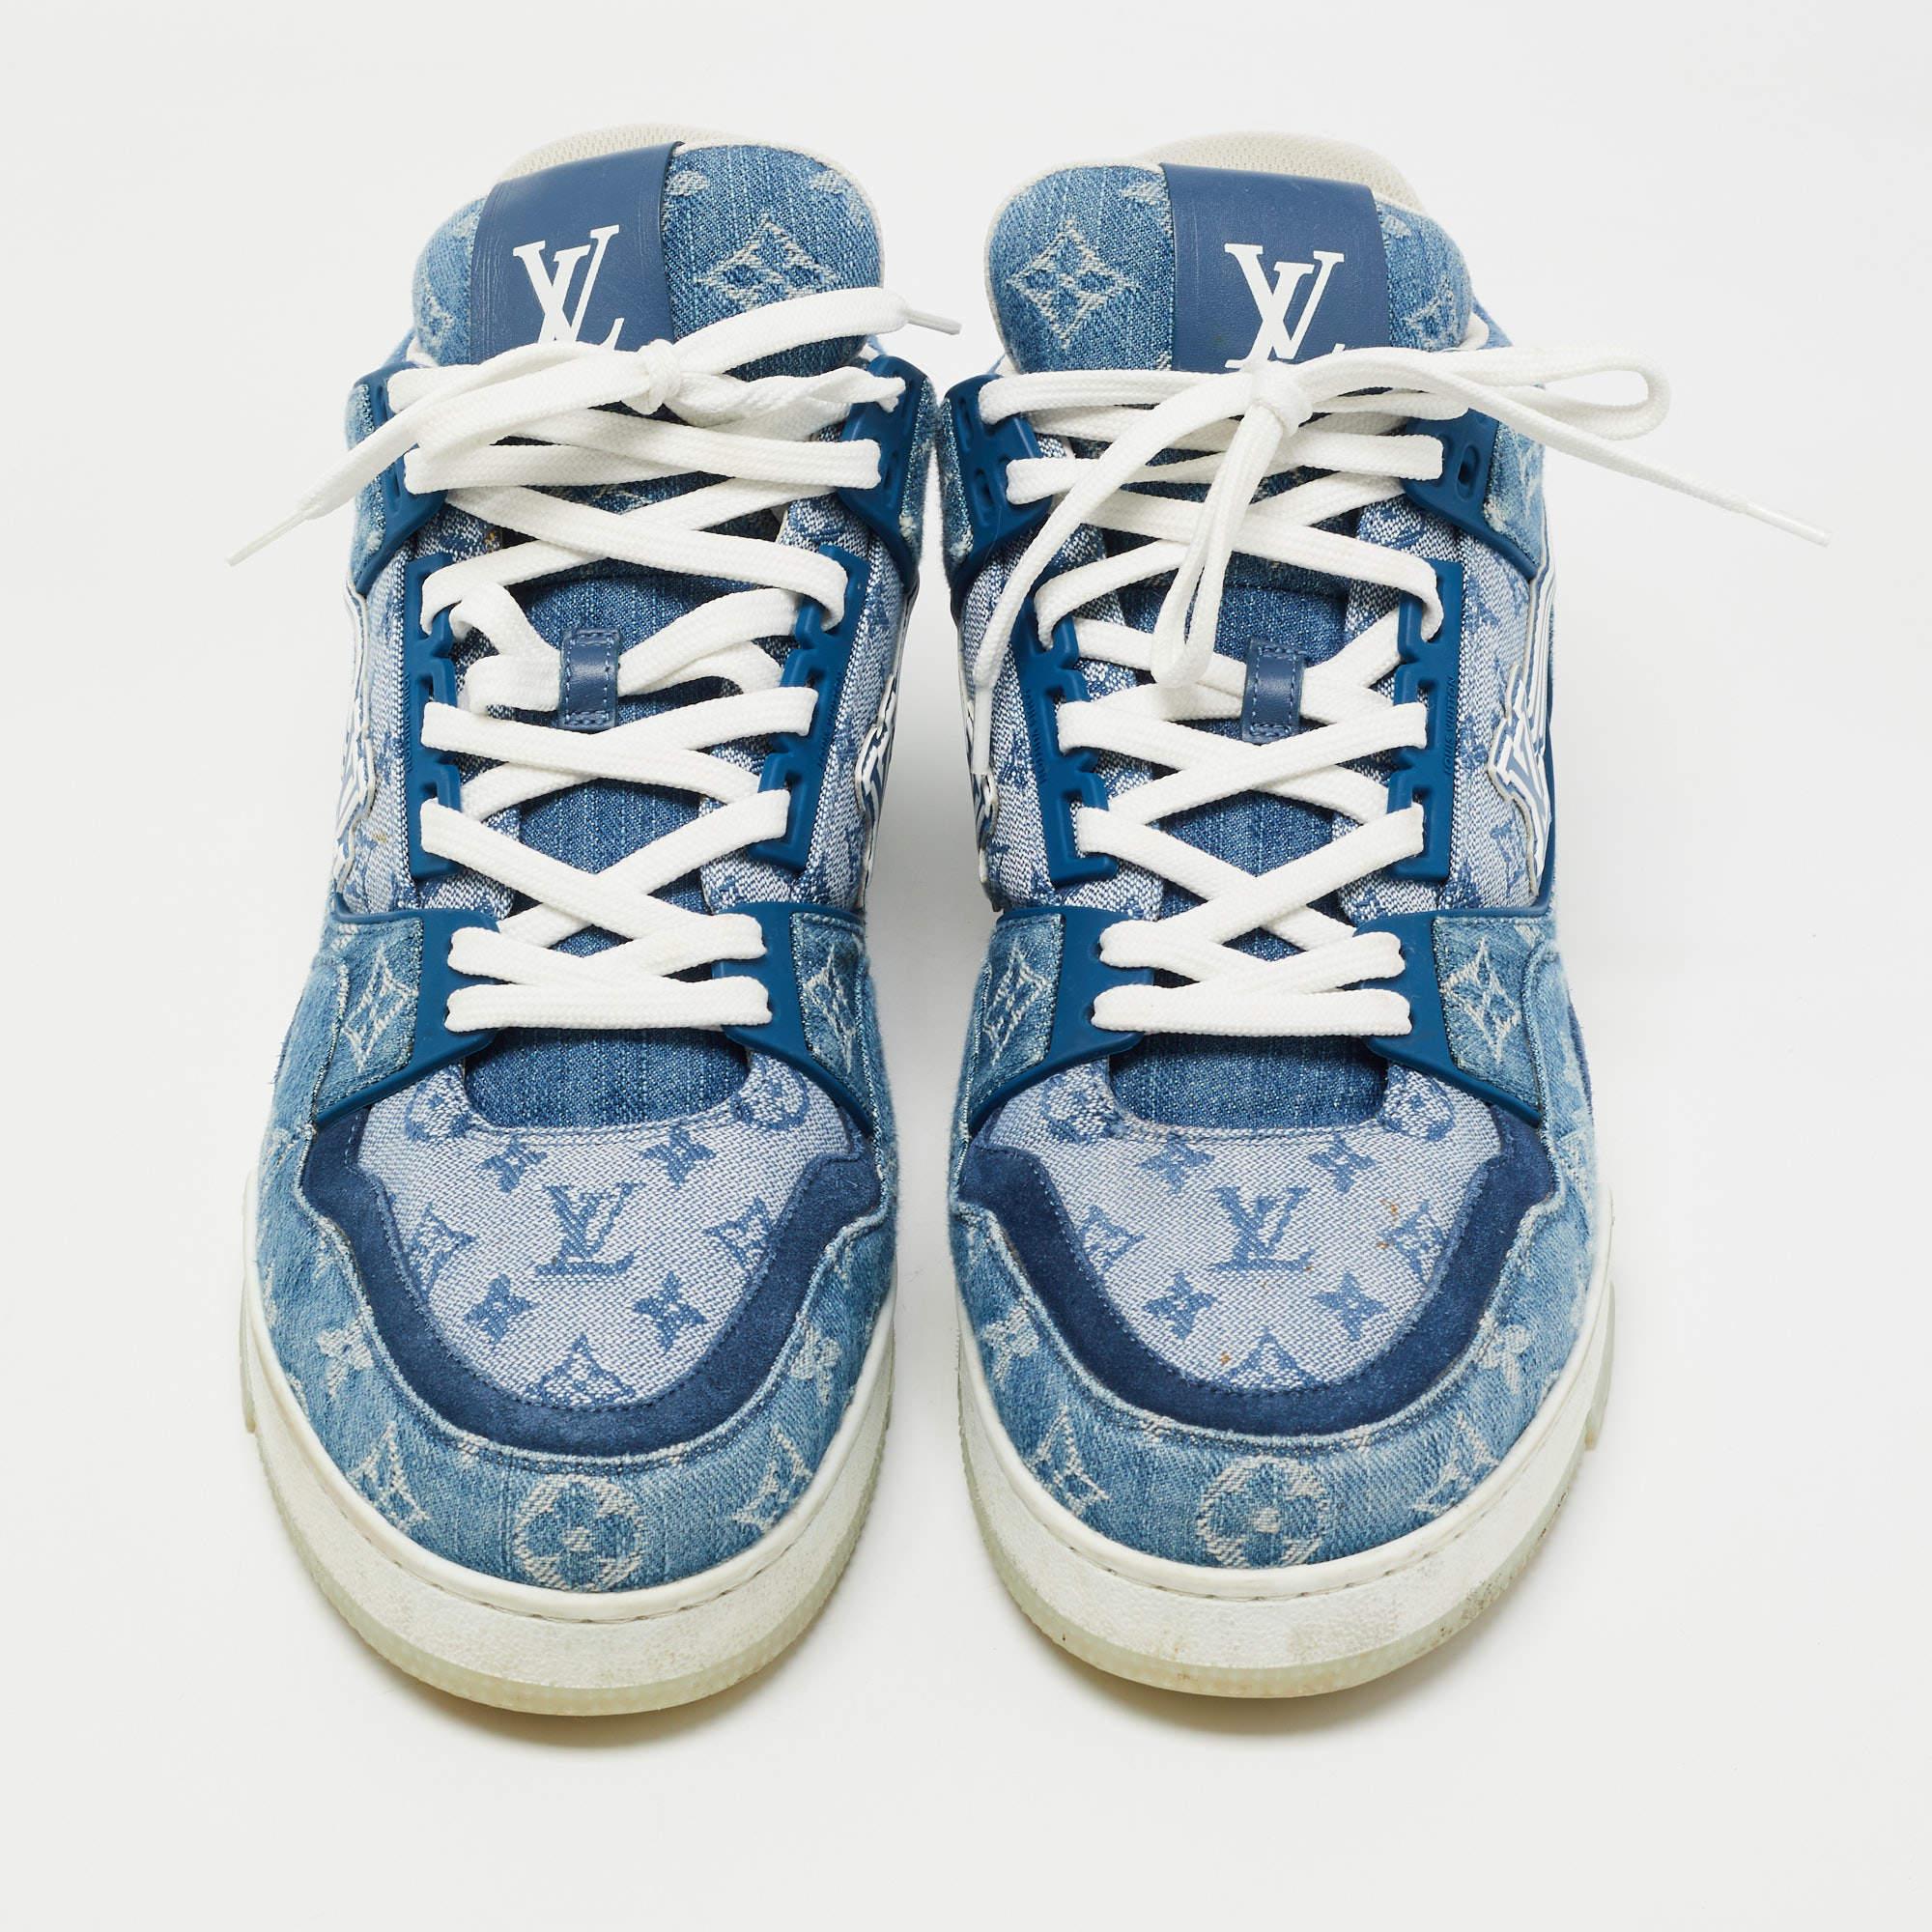 Give your outfit a luxe update with this pair of designer sneakers. The creation is sewn perfectly to help you make a statement in them for a long time.

Includes: Original Dustbag

 